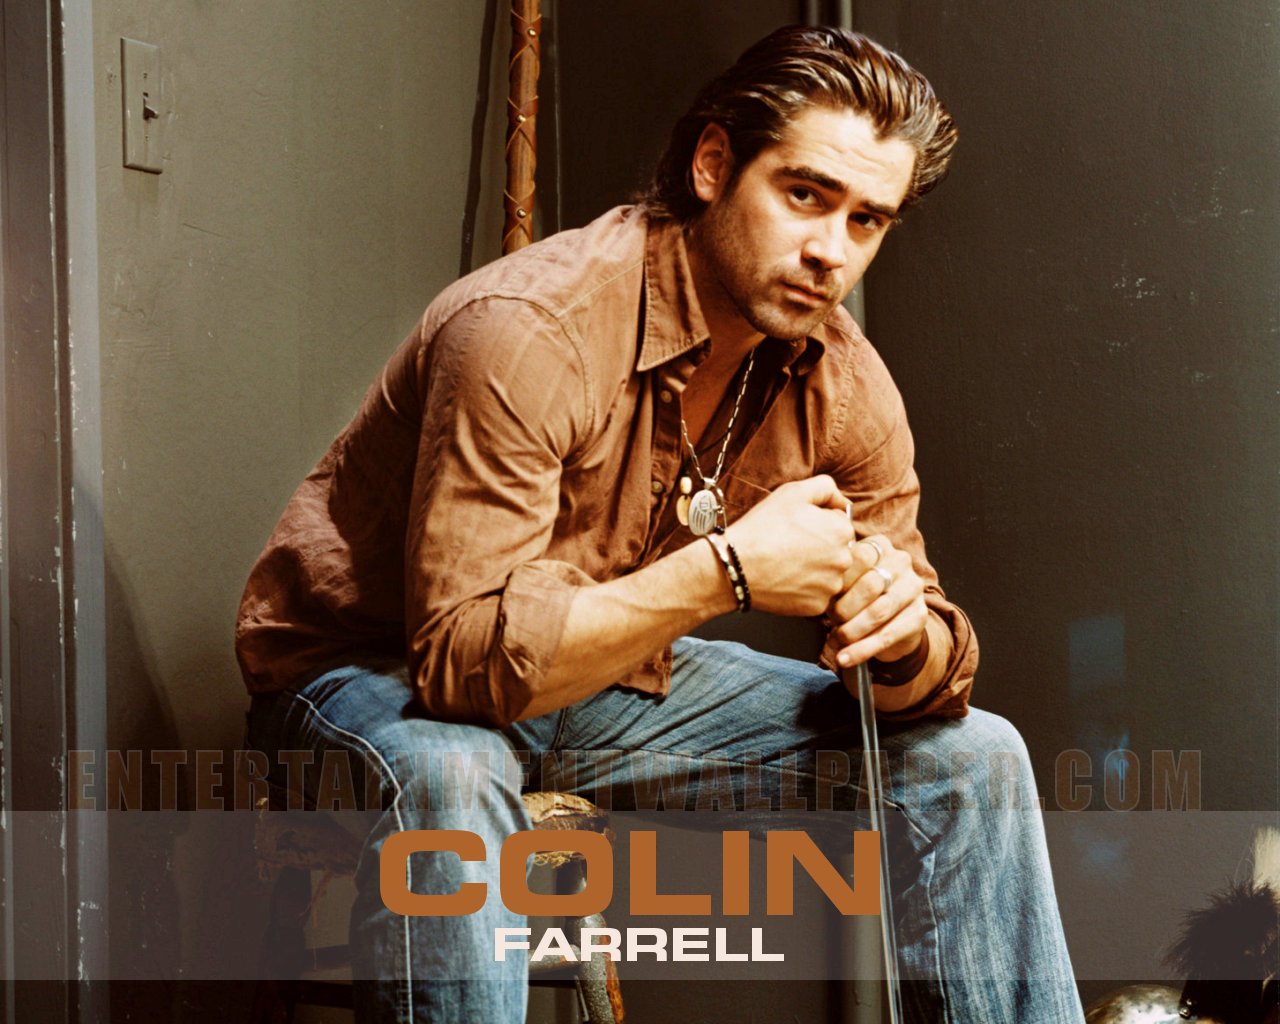 Colin Farrell Image HD Wallpaper And Background